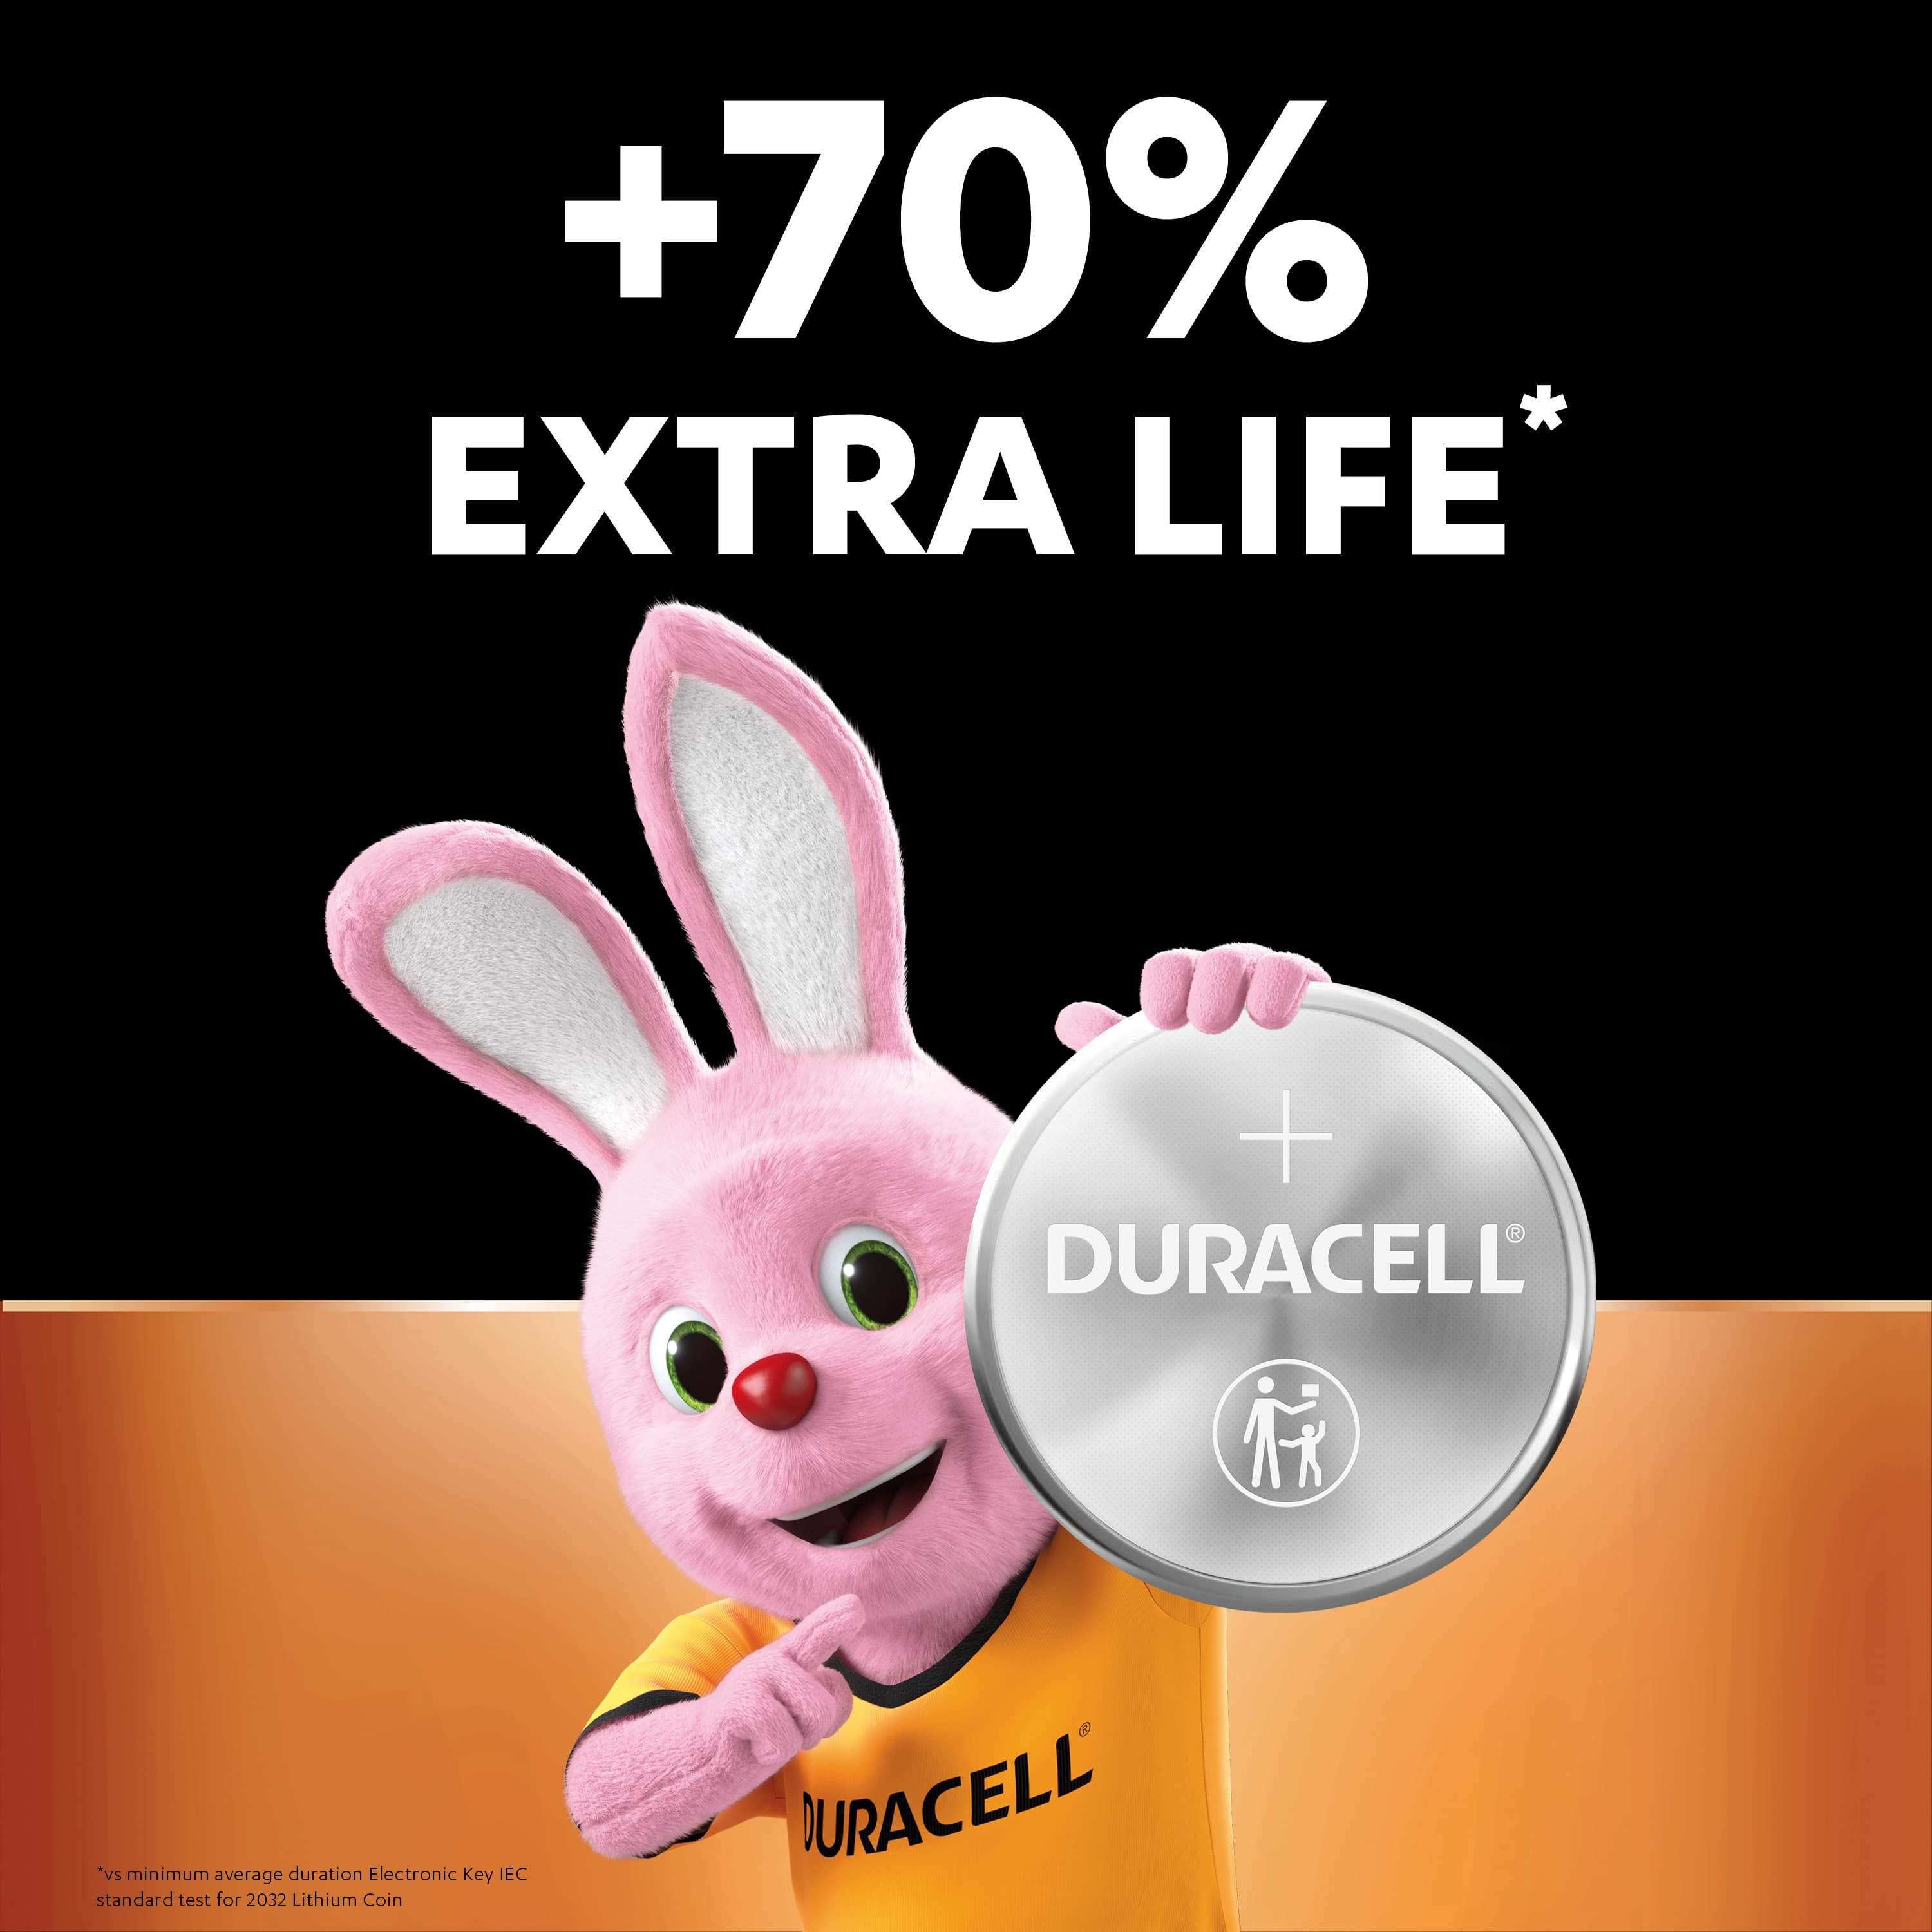 Duracell CR2032 Coin cell batteries, Pack of 6